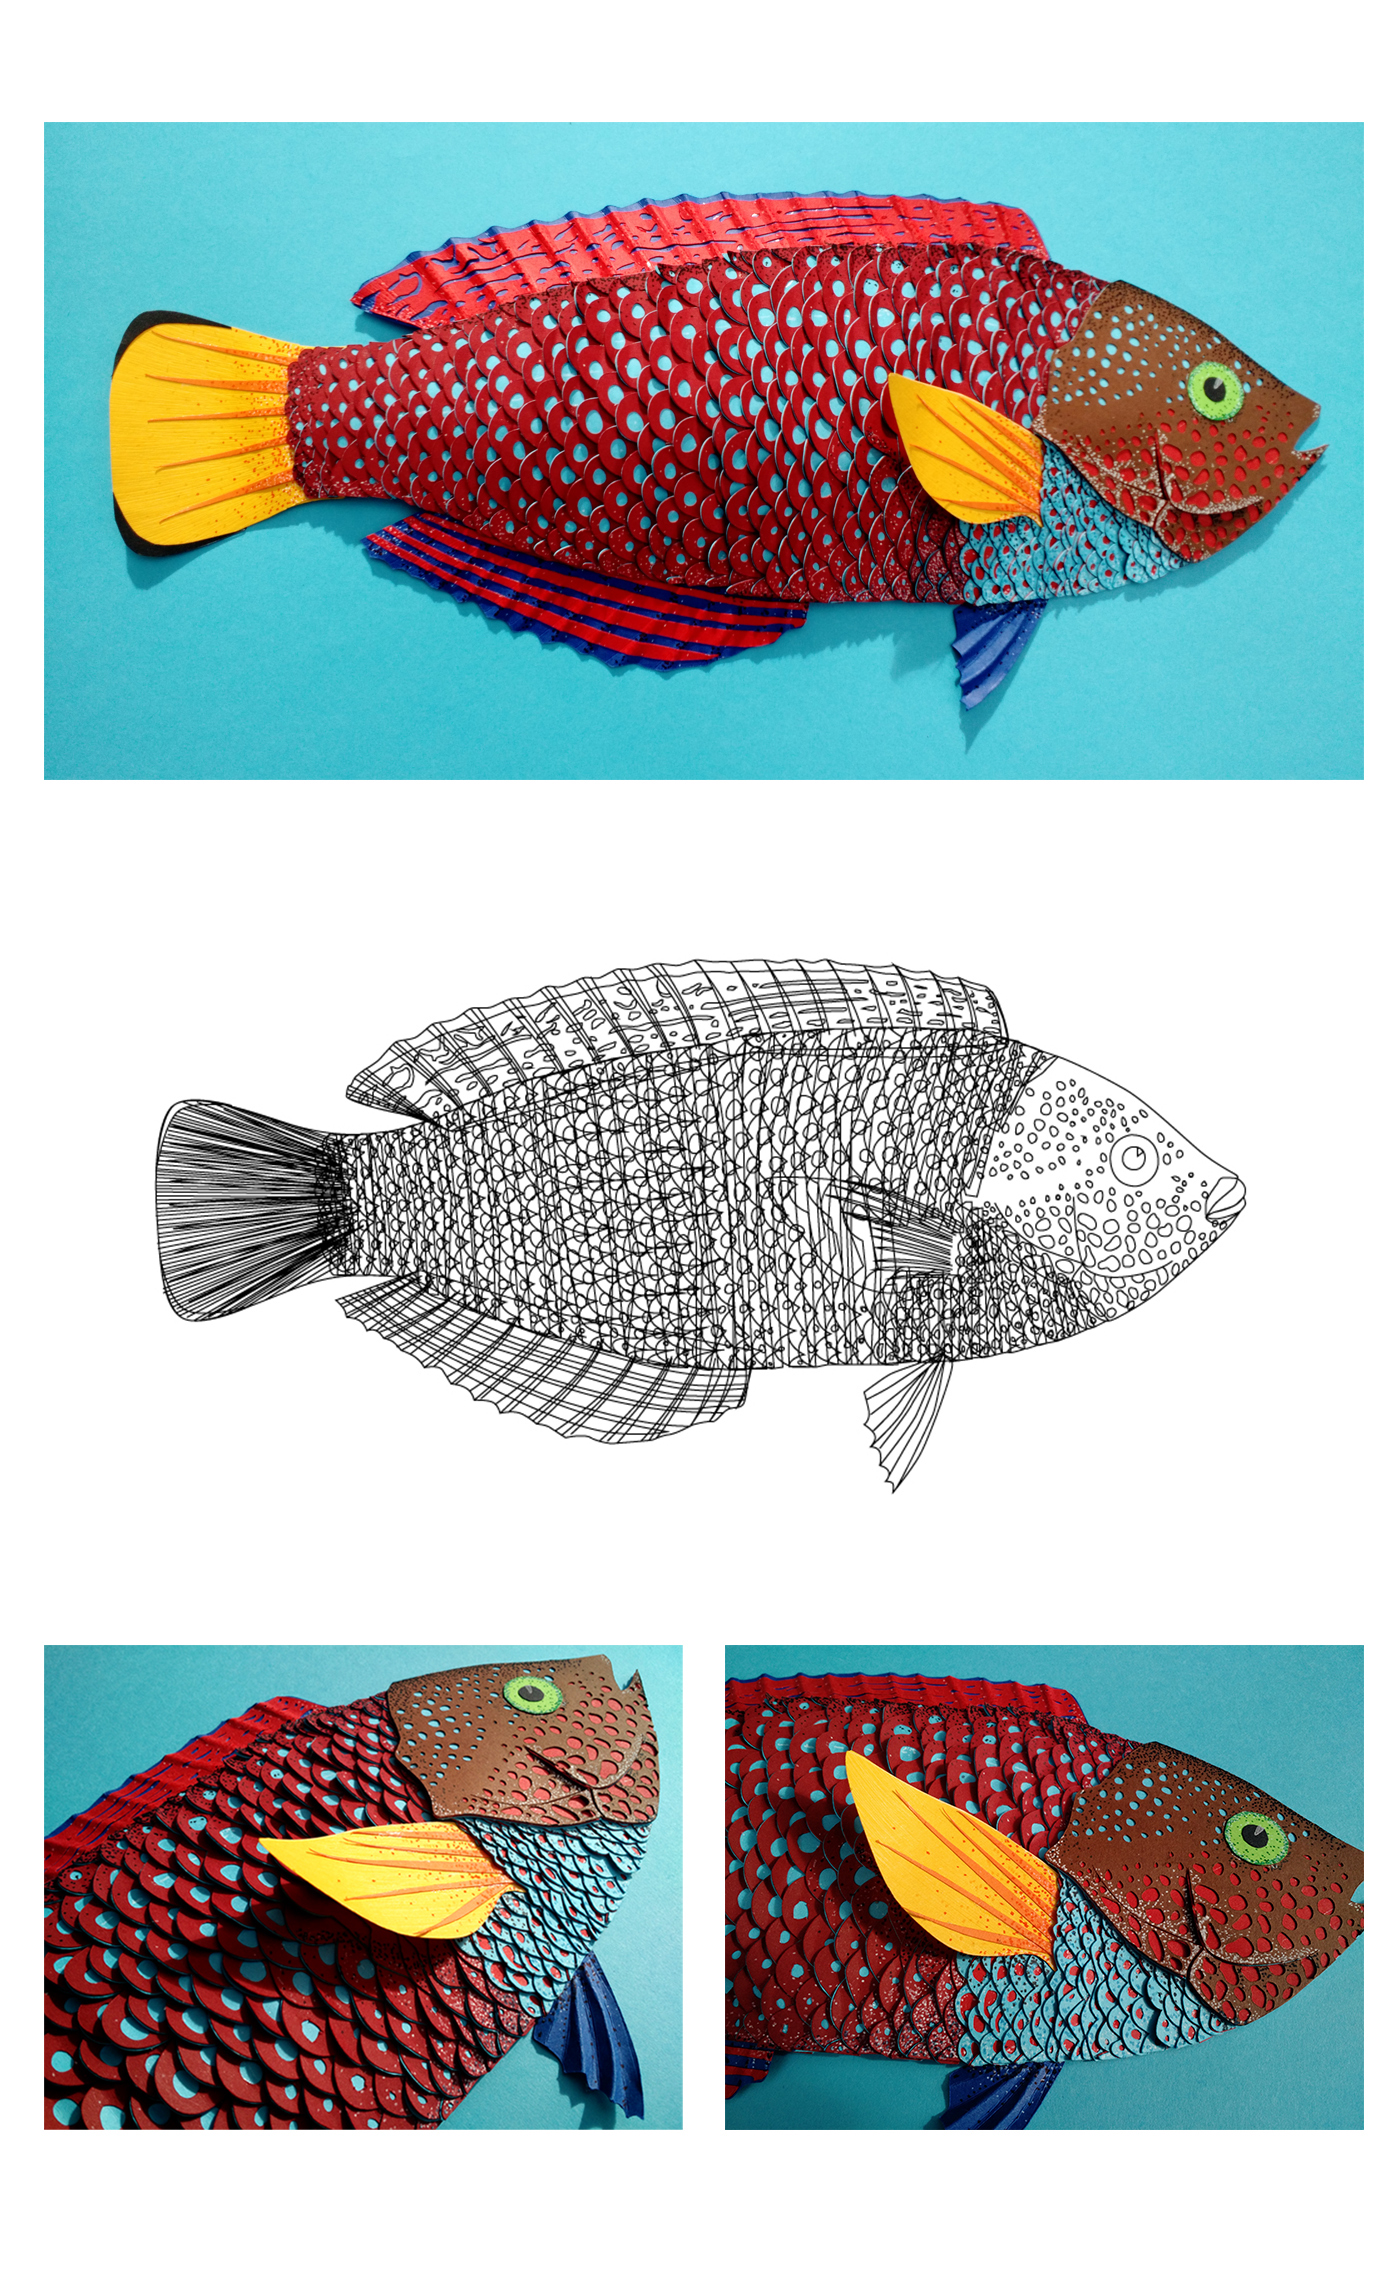 fish paper papercraft colombia Anampses cuvier scientific ILLUSTRATION 